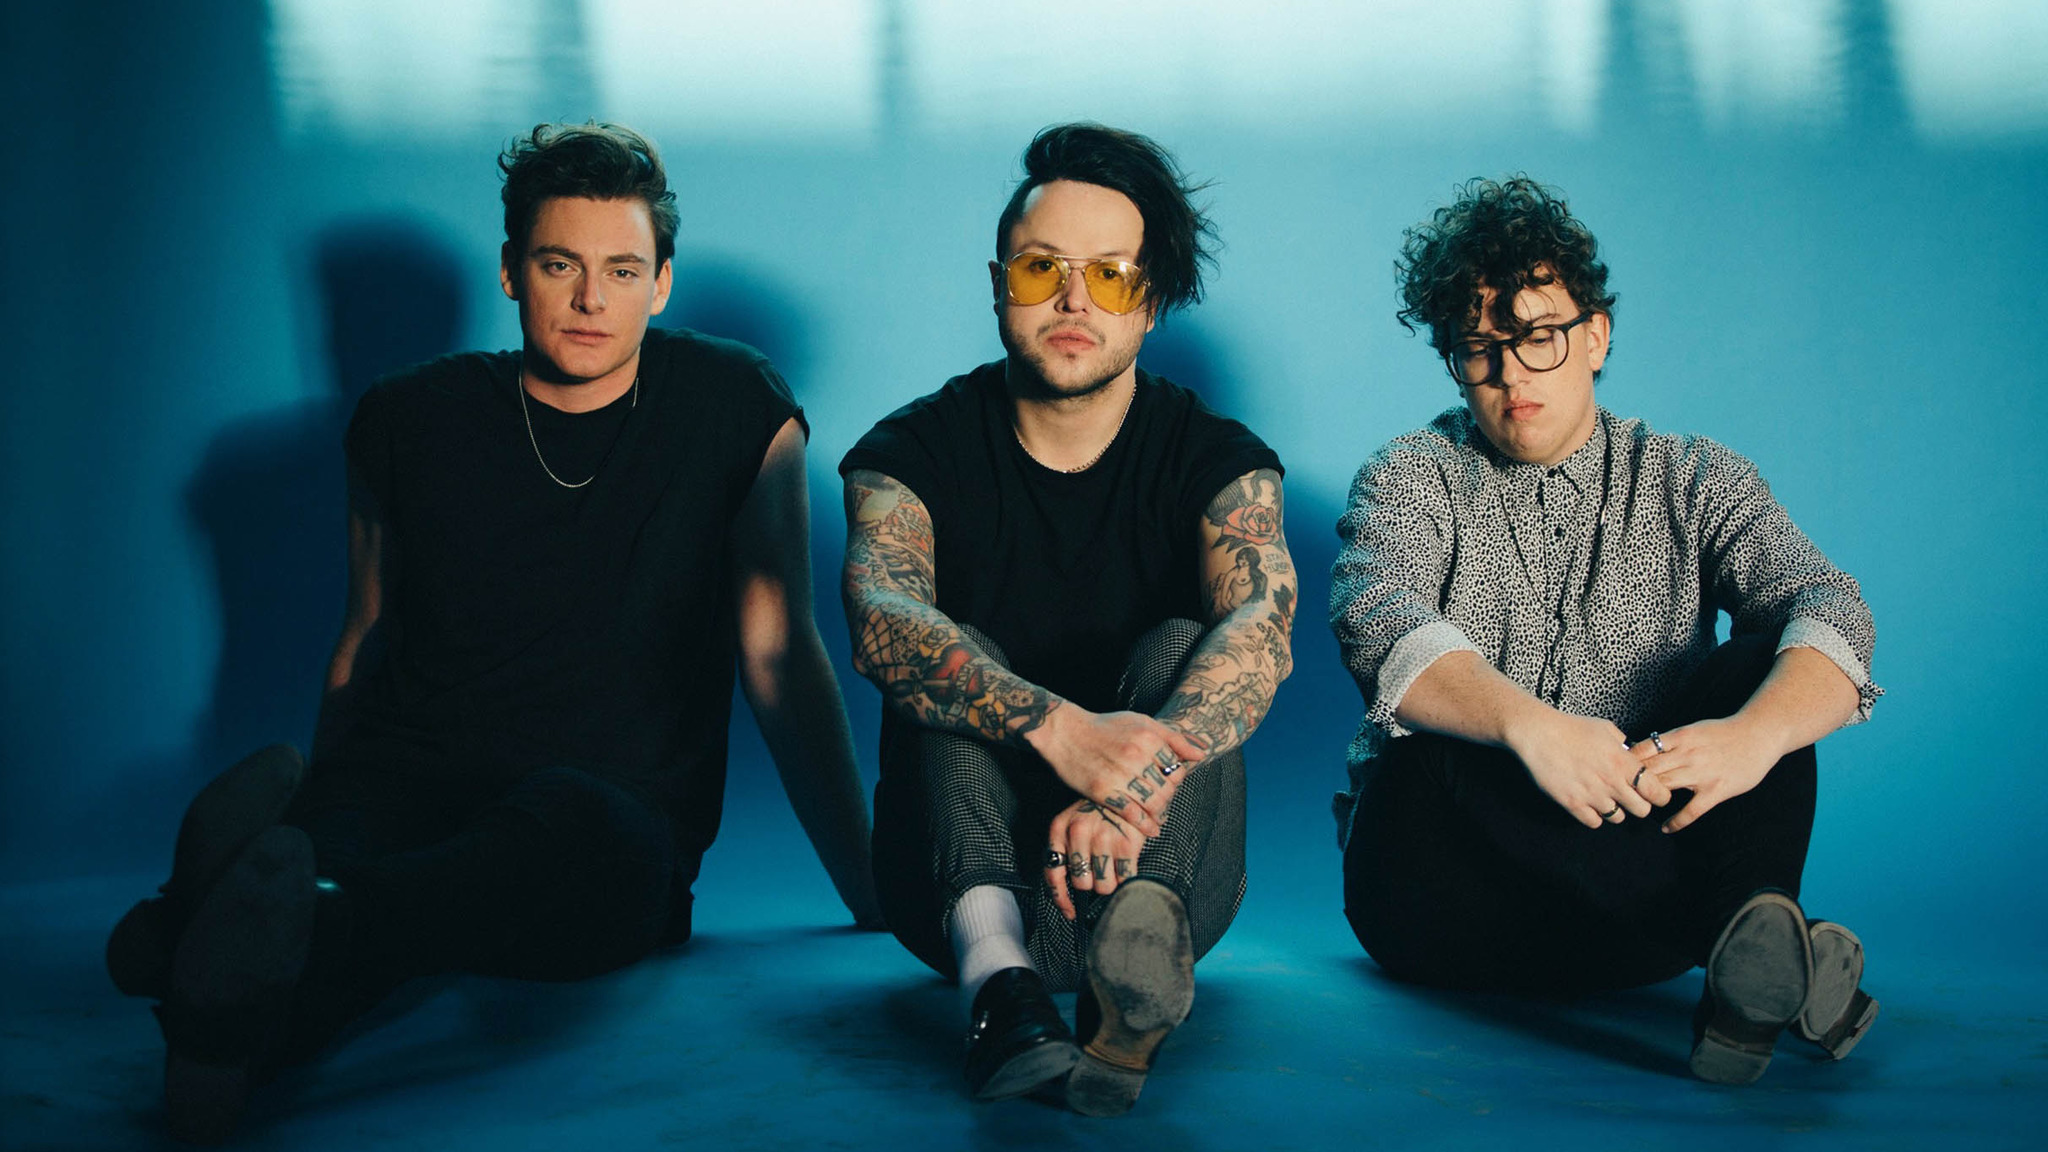 Ones to Watch Presents: lovelytheband